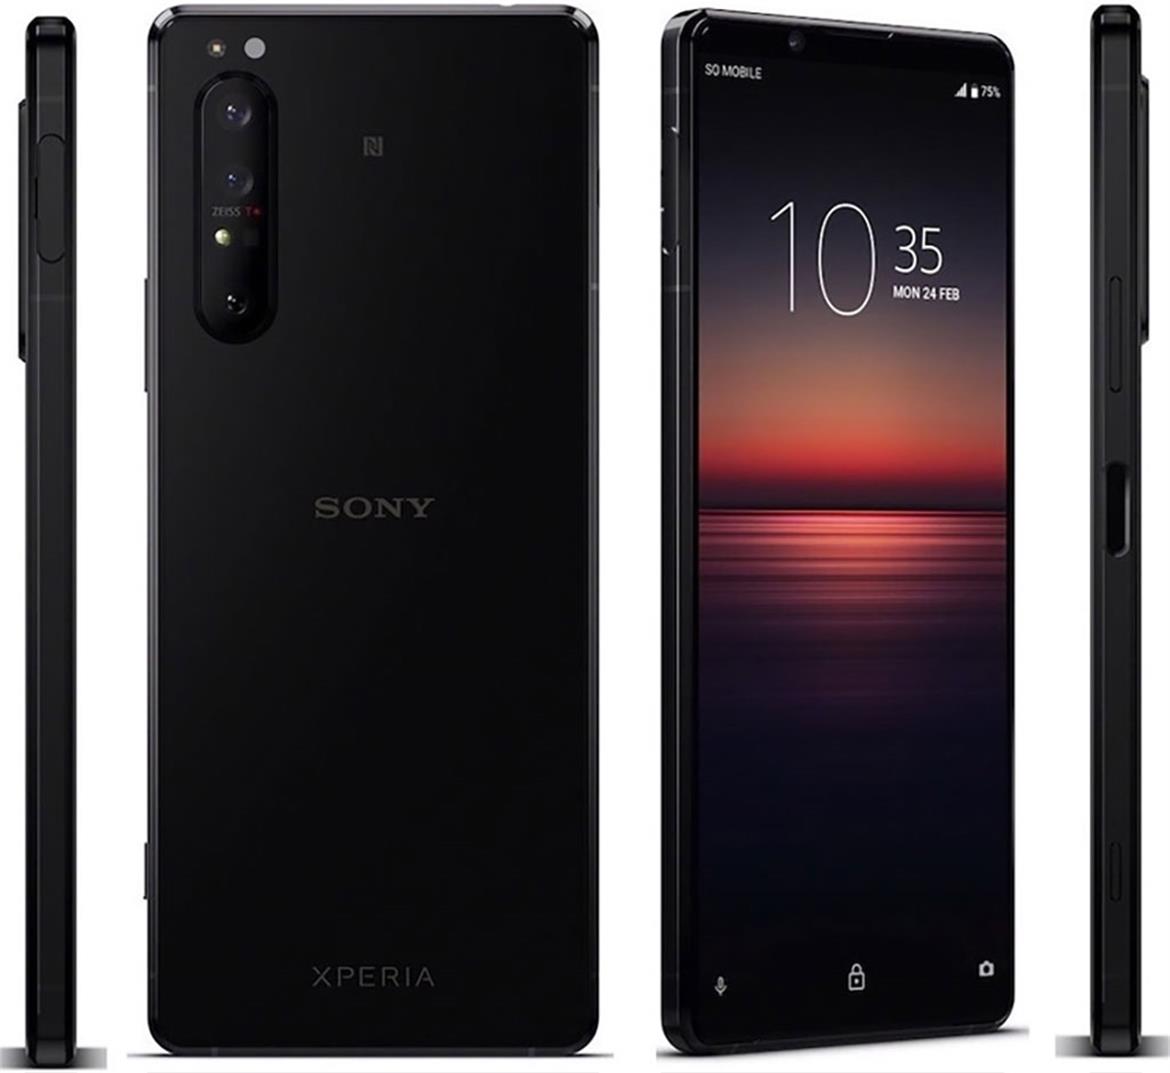 Flagship Xperia 1 II Phone Pre-Order Pricing Is So Wild Sony Is Having Second Thoughts